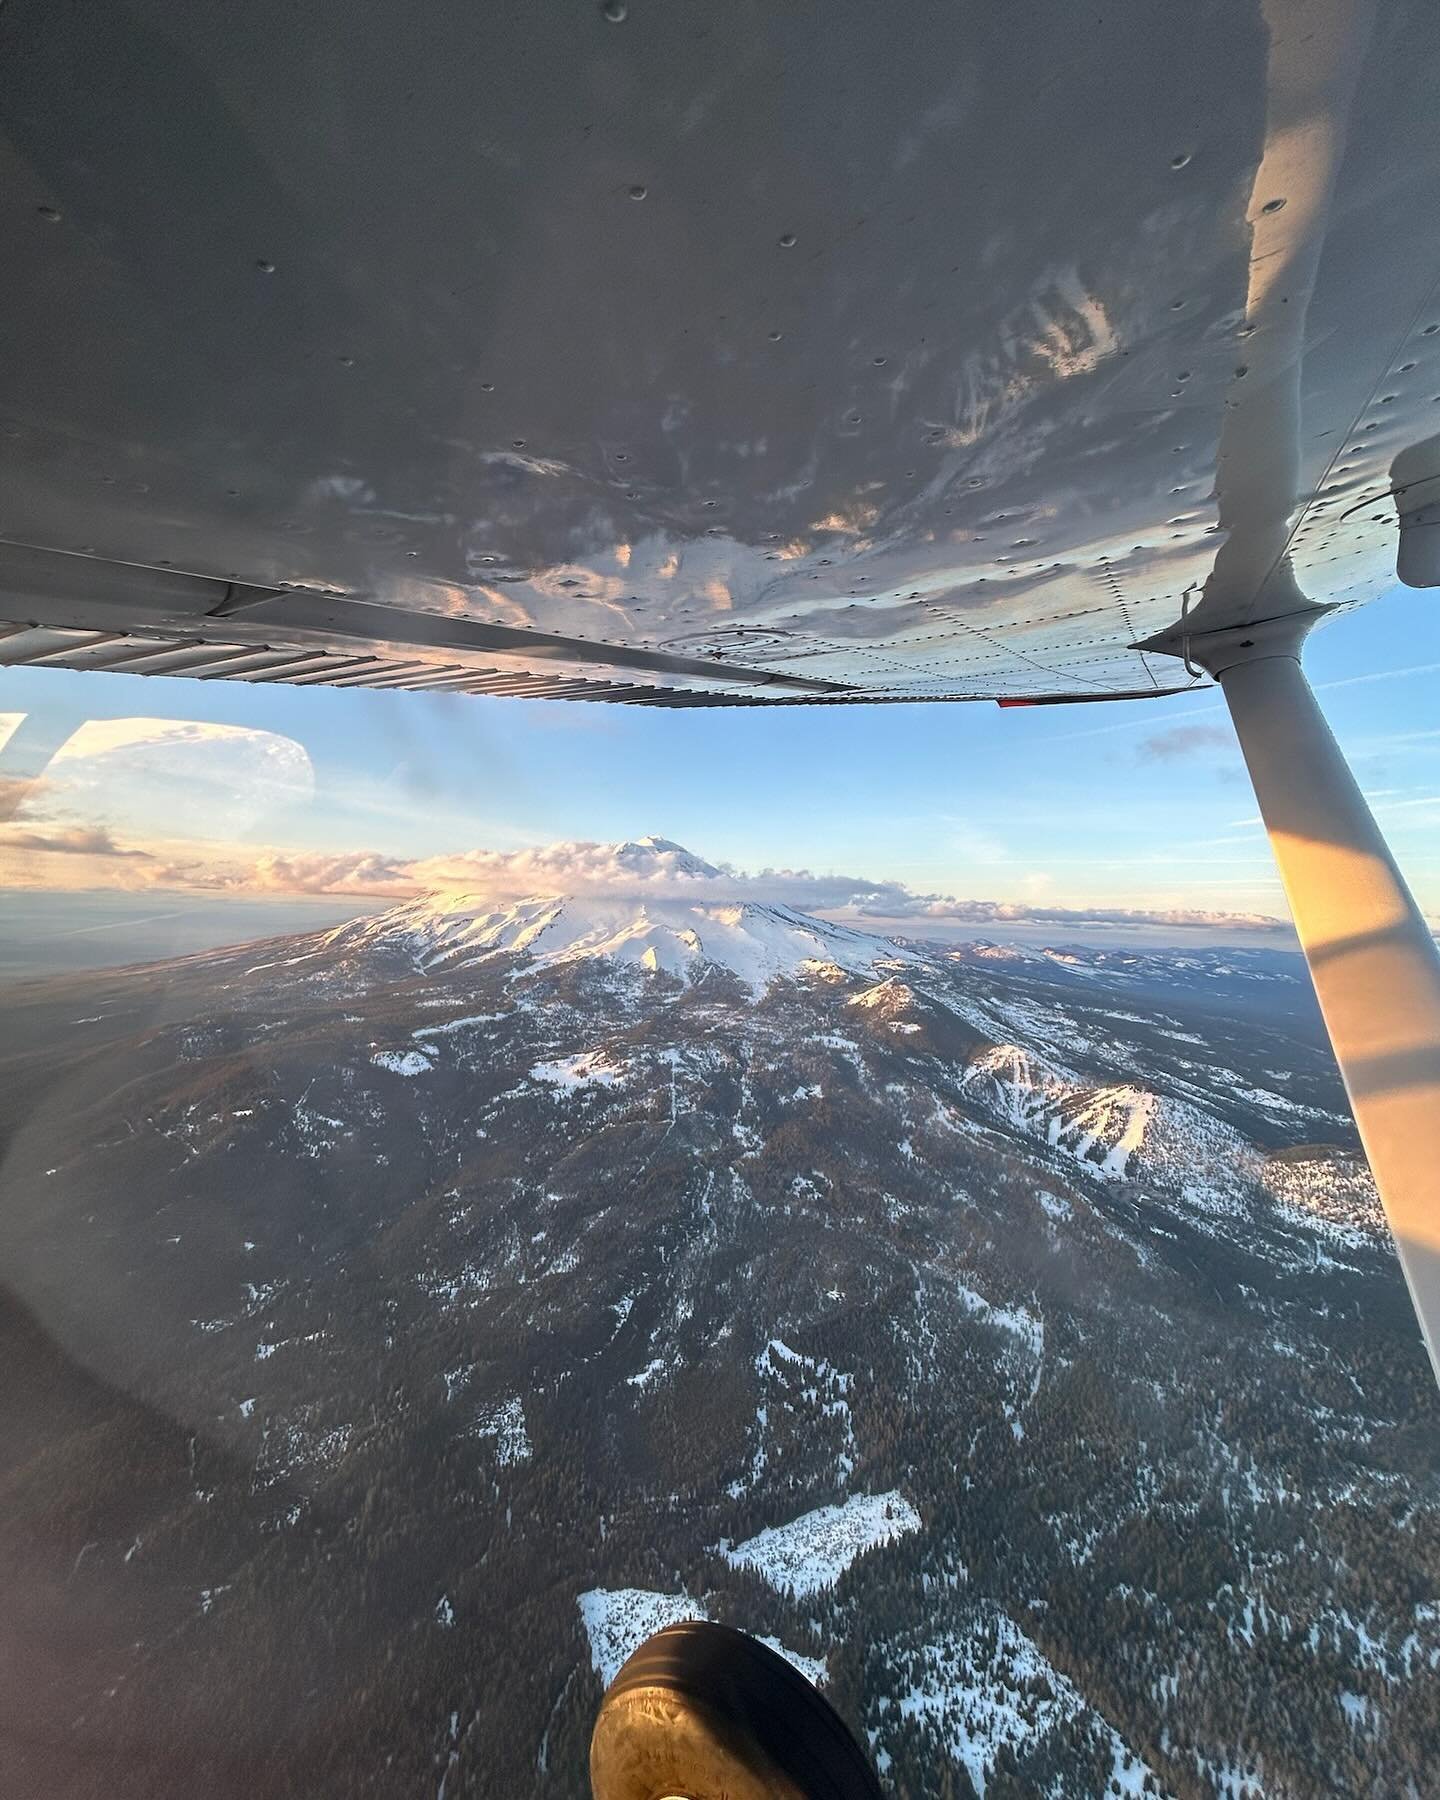 Weekend adventures ✈️ Mount Shasta looks pretty awesome from the air 🏔️
&bull;
&bull;
&bull;
#shasta #airplane #adventures #weekend #pilot #pilotlife